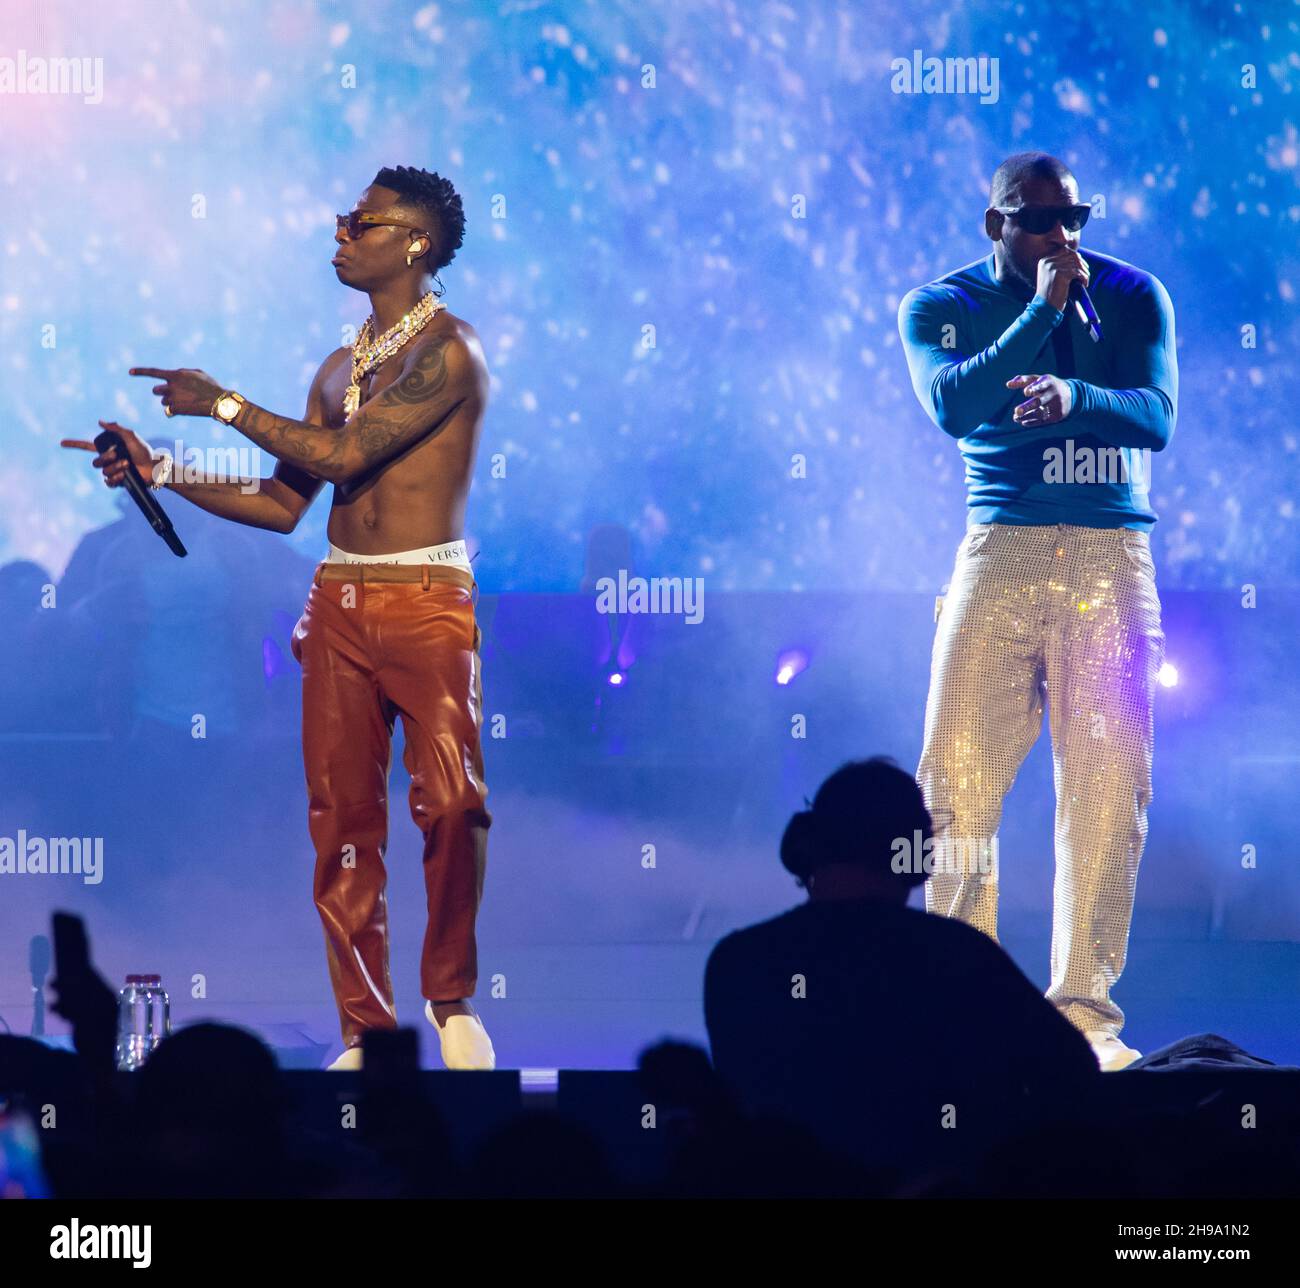 London, UK. 1st December 2021. Wizkid & Skepta performs at The O2 Arena on Day3. Photographed by Michael Tubi Stock Photo